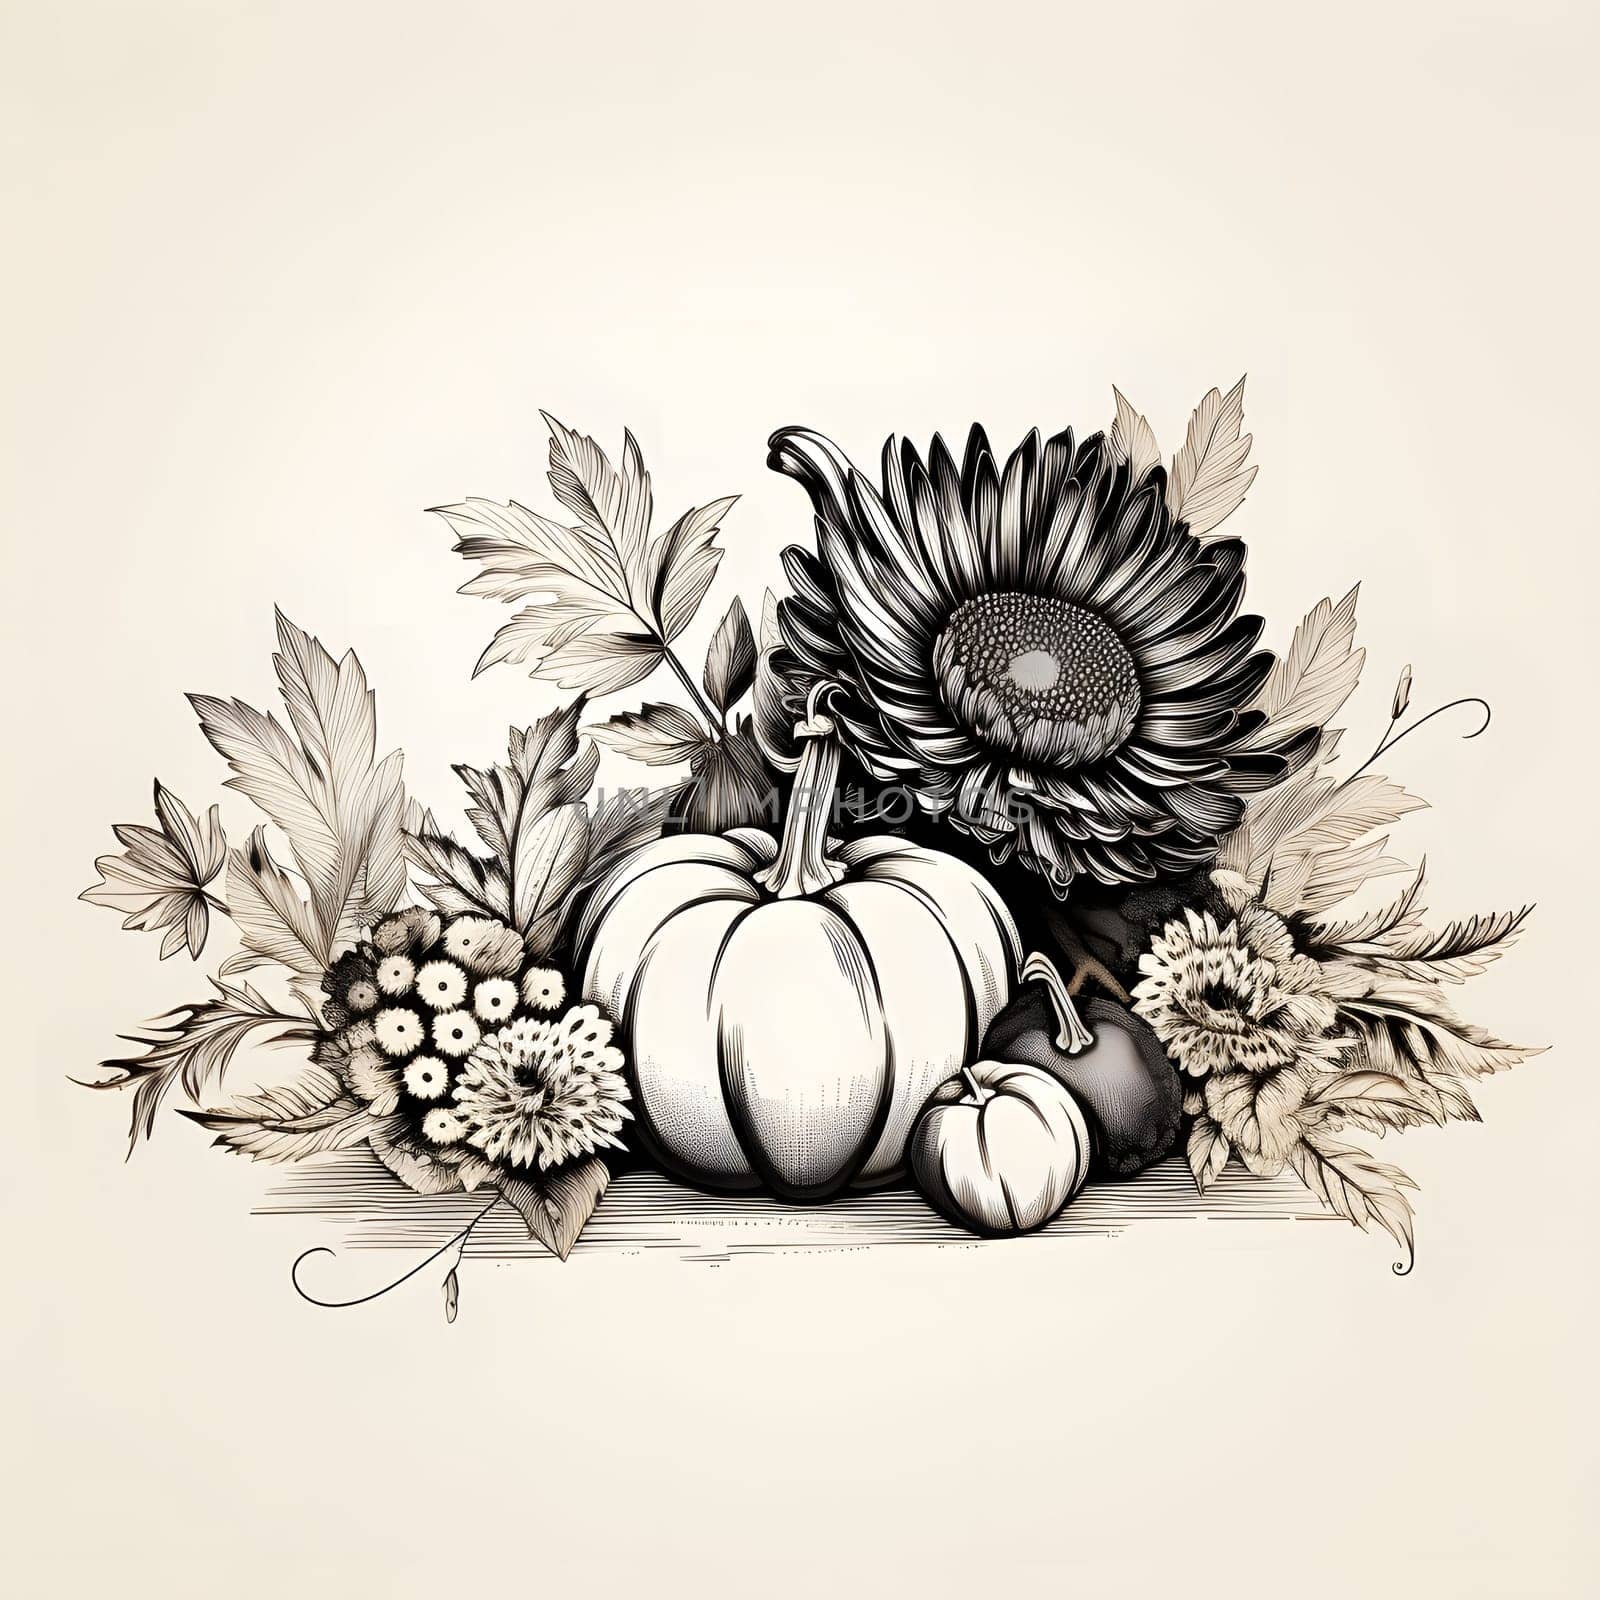 ; pumpkins flowers leaves uniform isolated background. Pumpkin as a dish of thanksgiving for the harvest. An atmosphere of joy and celebration.